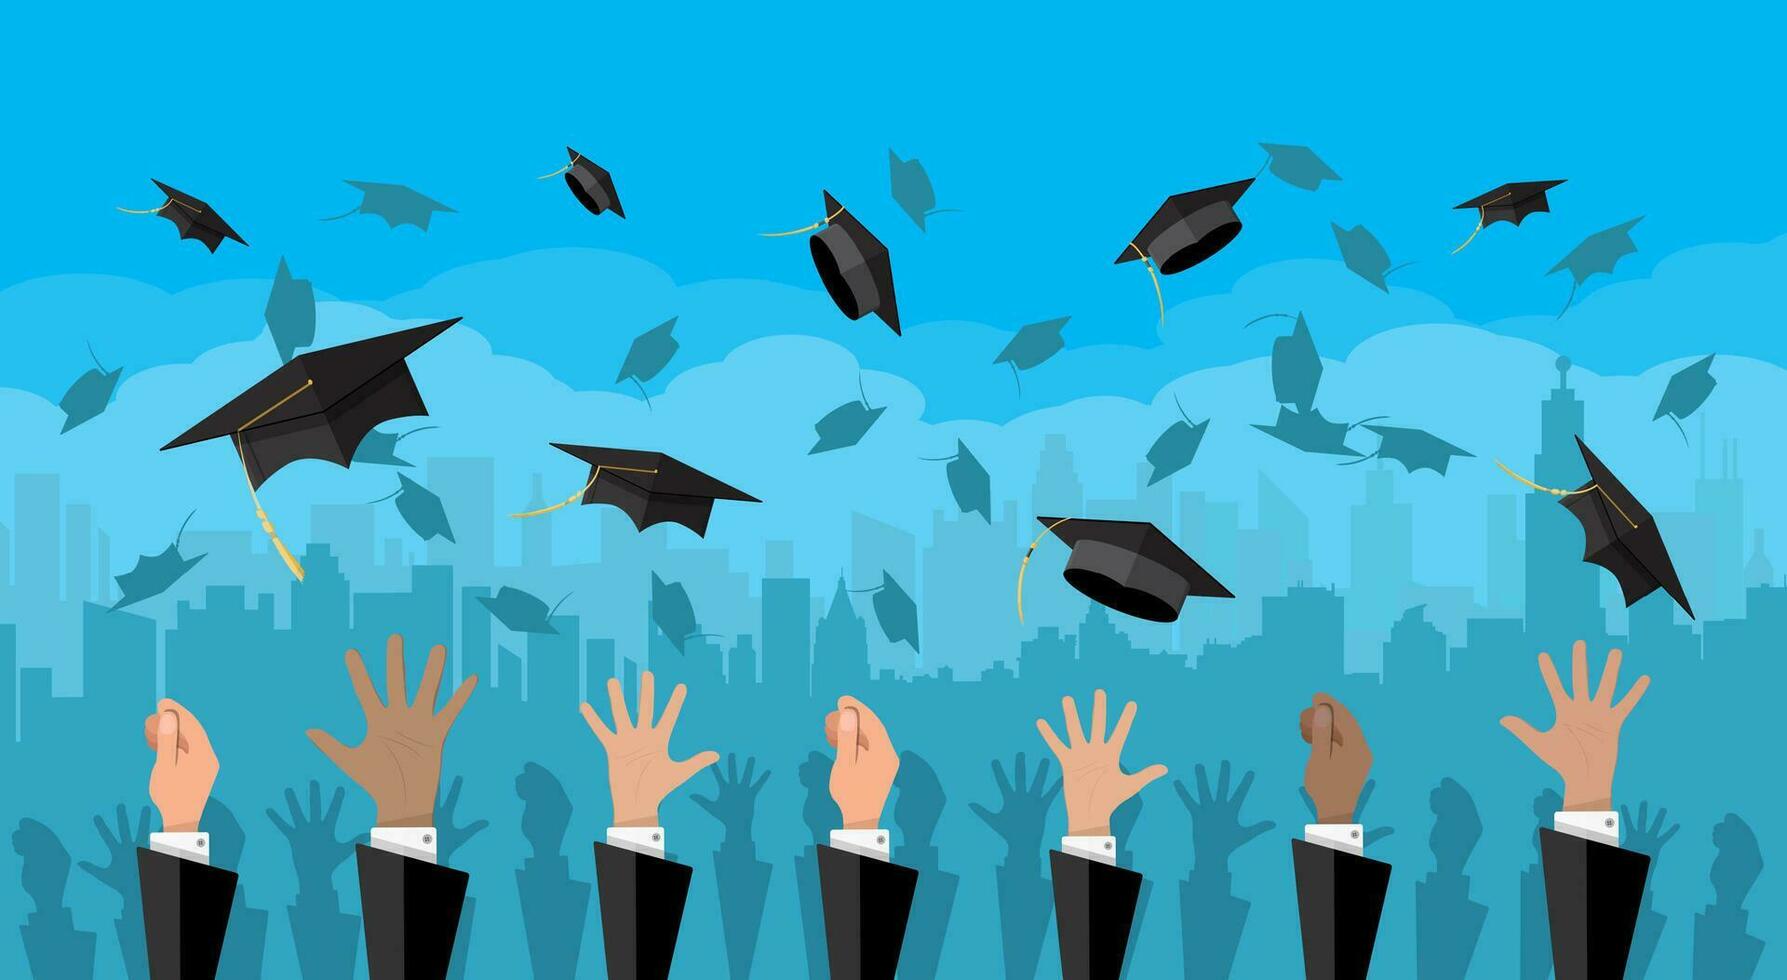 Hands of graduates throwing graduation hats in the air. Concept of education. College or university ceremony. Cityscape. Vector illustration in flat style